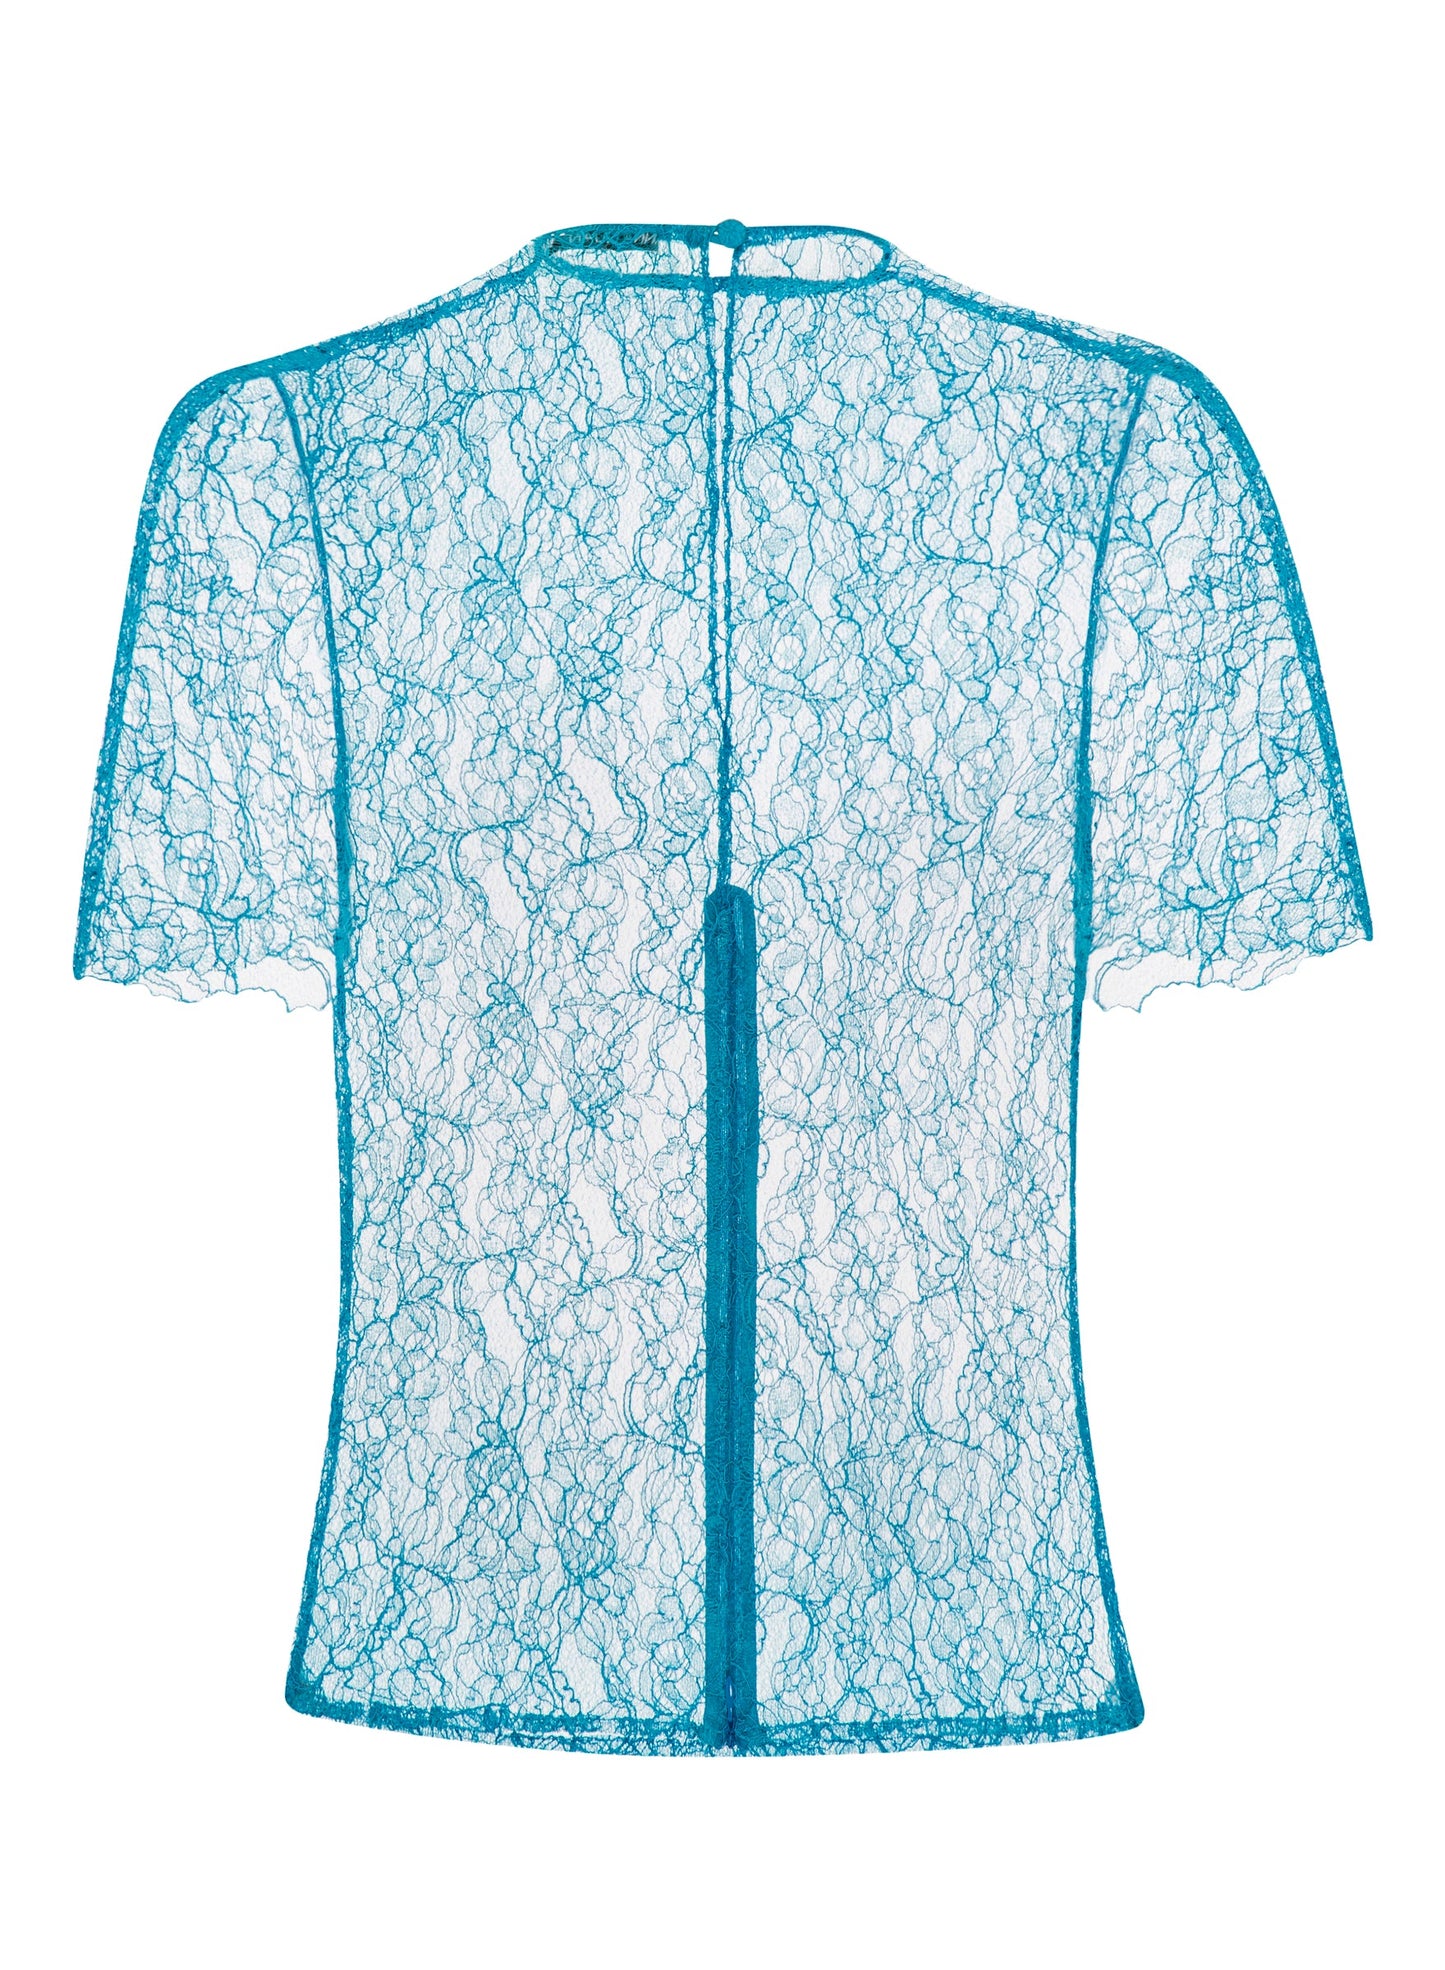 COCO TOP (TEAL LACE)